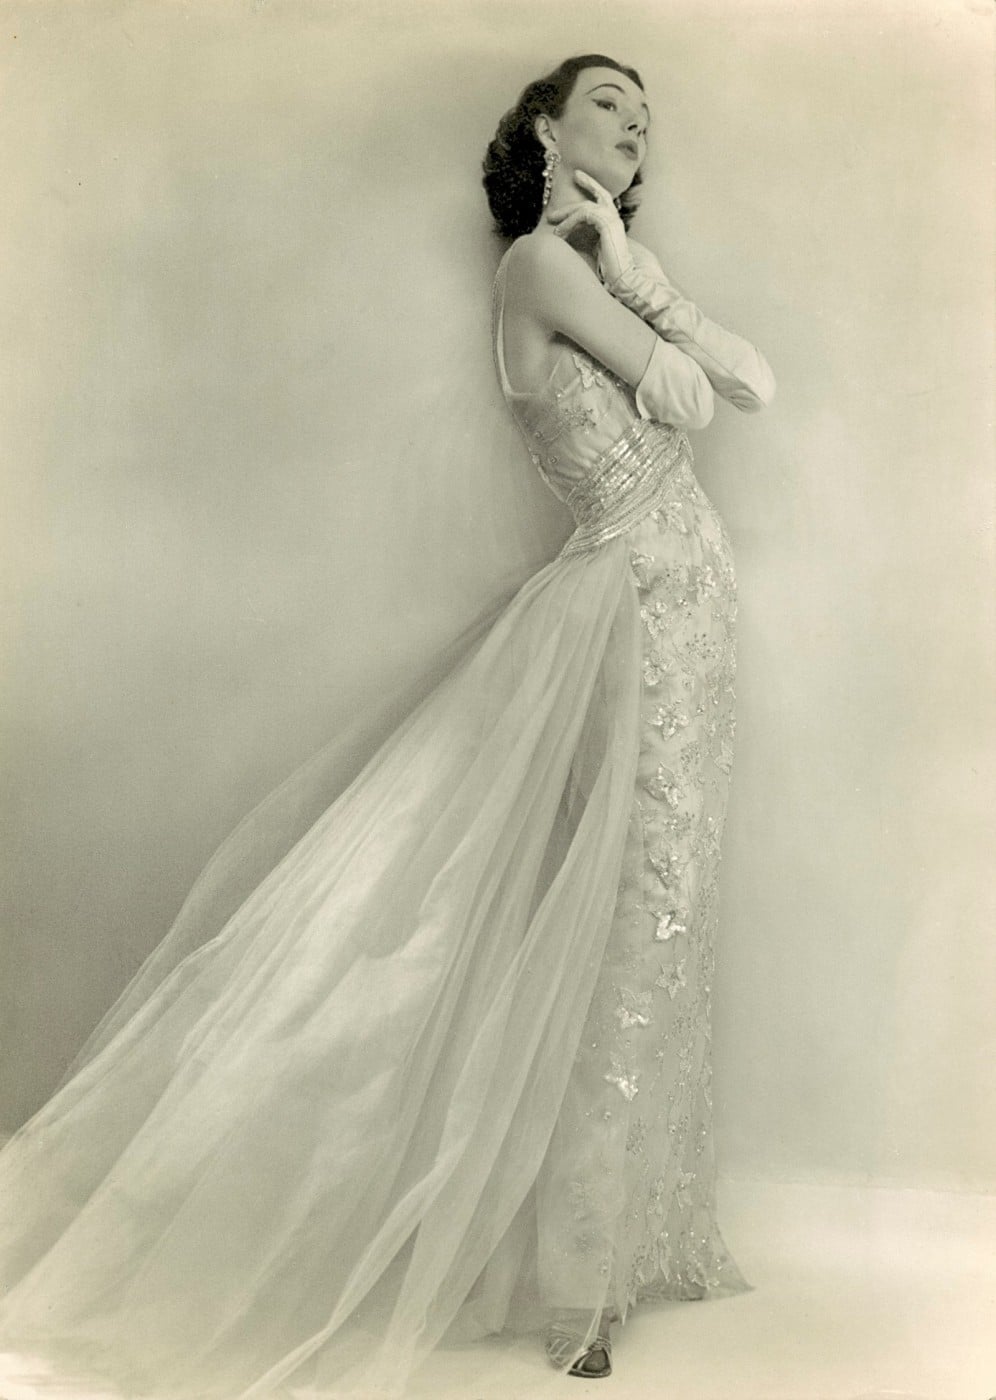 June modelling a pale pink beaded silk evening dress by Worth about 1952 -55 photograph by Michael Dunne Gloucester Cromwell Roads London